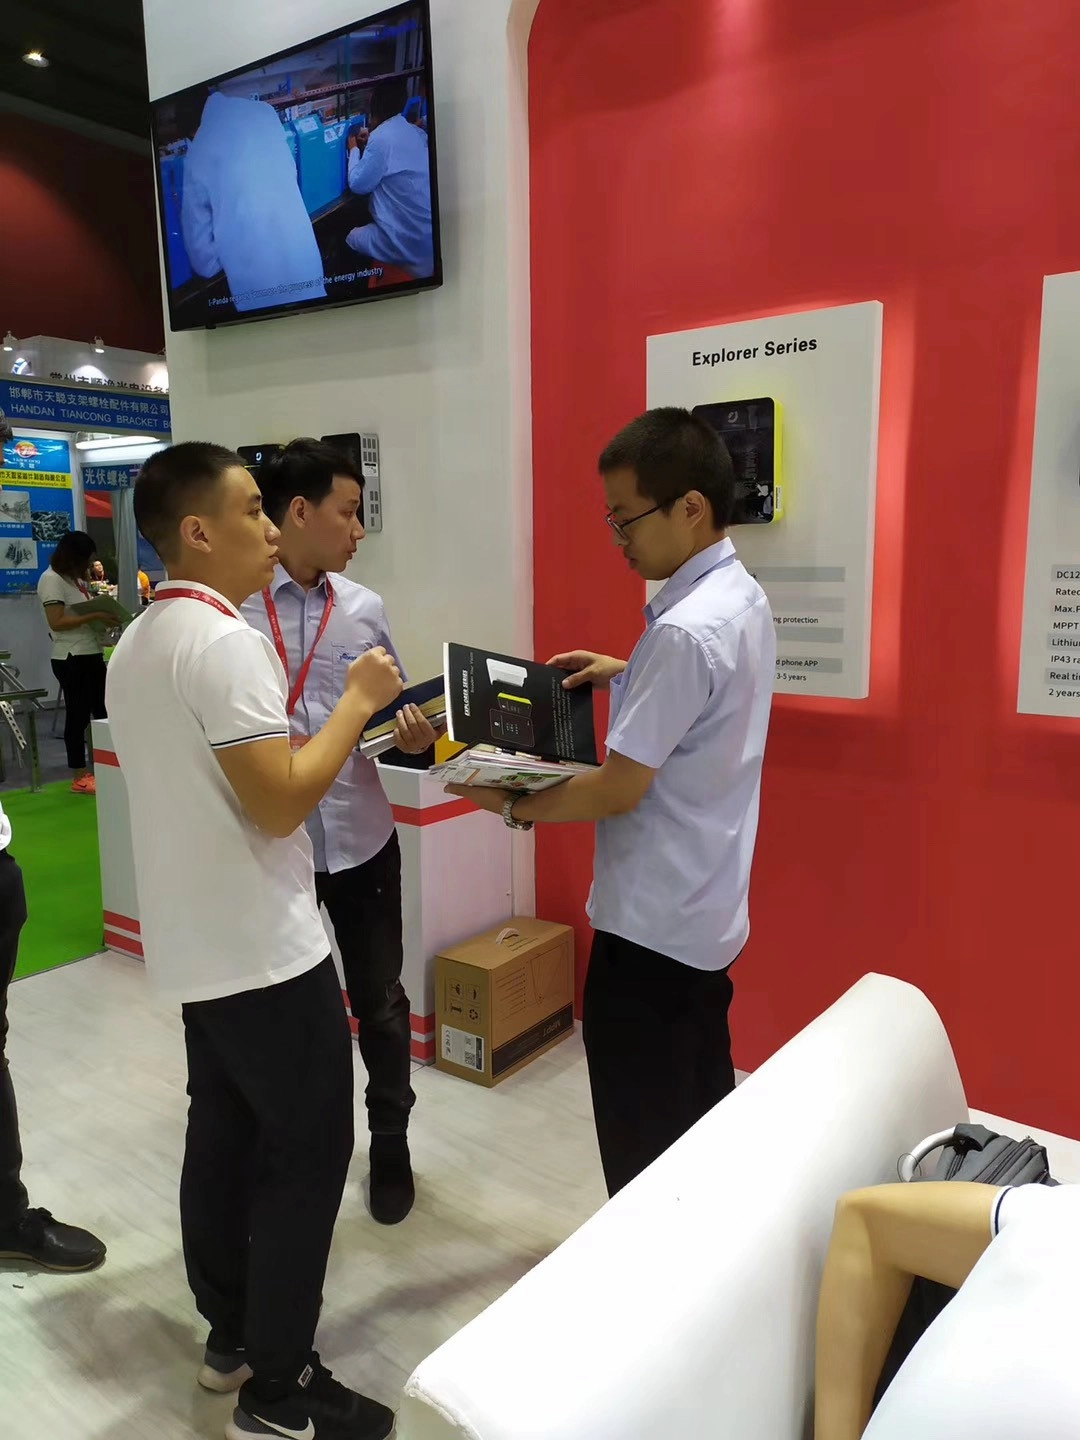 Ipandee_and_you_will_meet_in_2020_Guangzhou_International_Solar_PV_Exhibition_5.webp